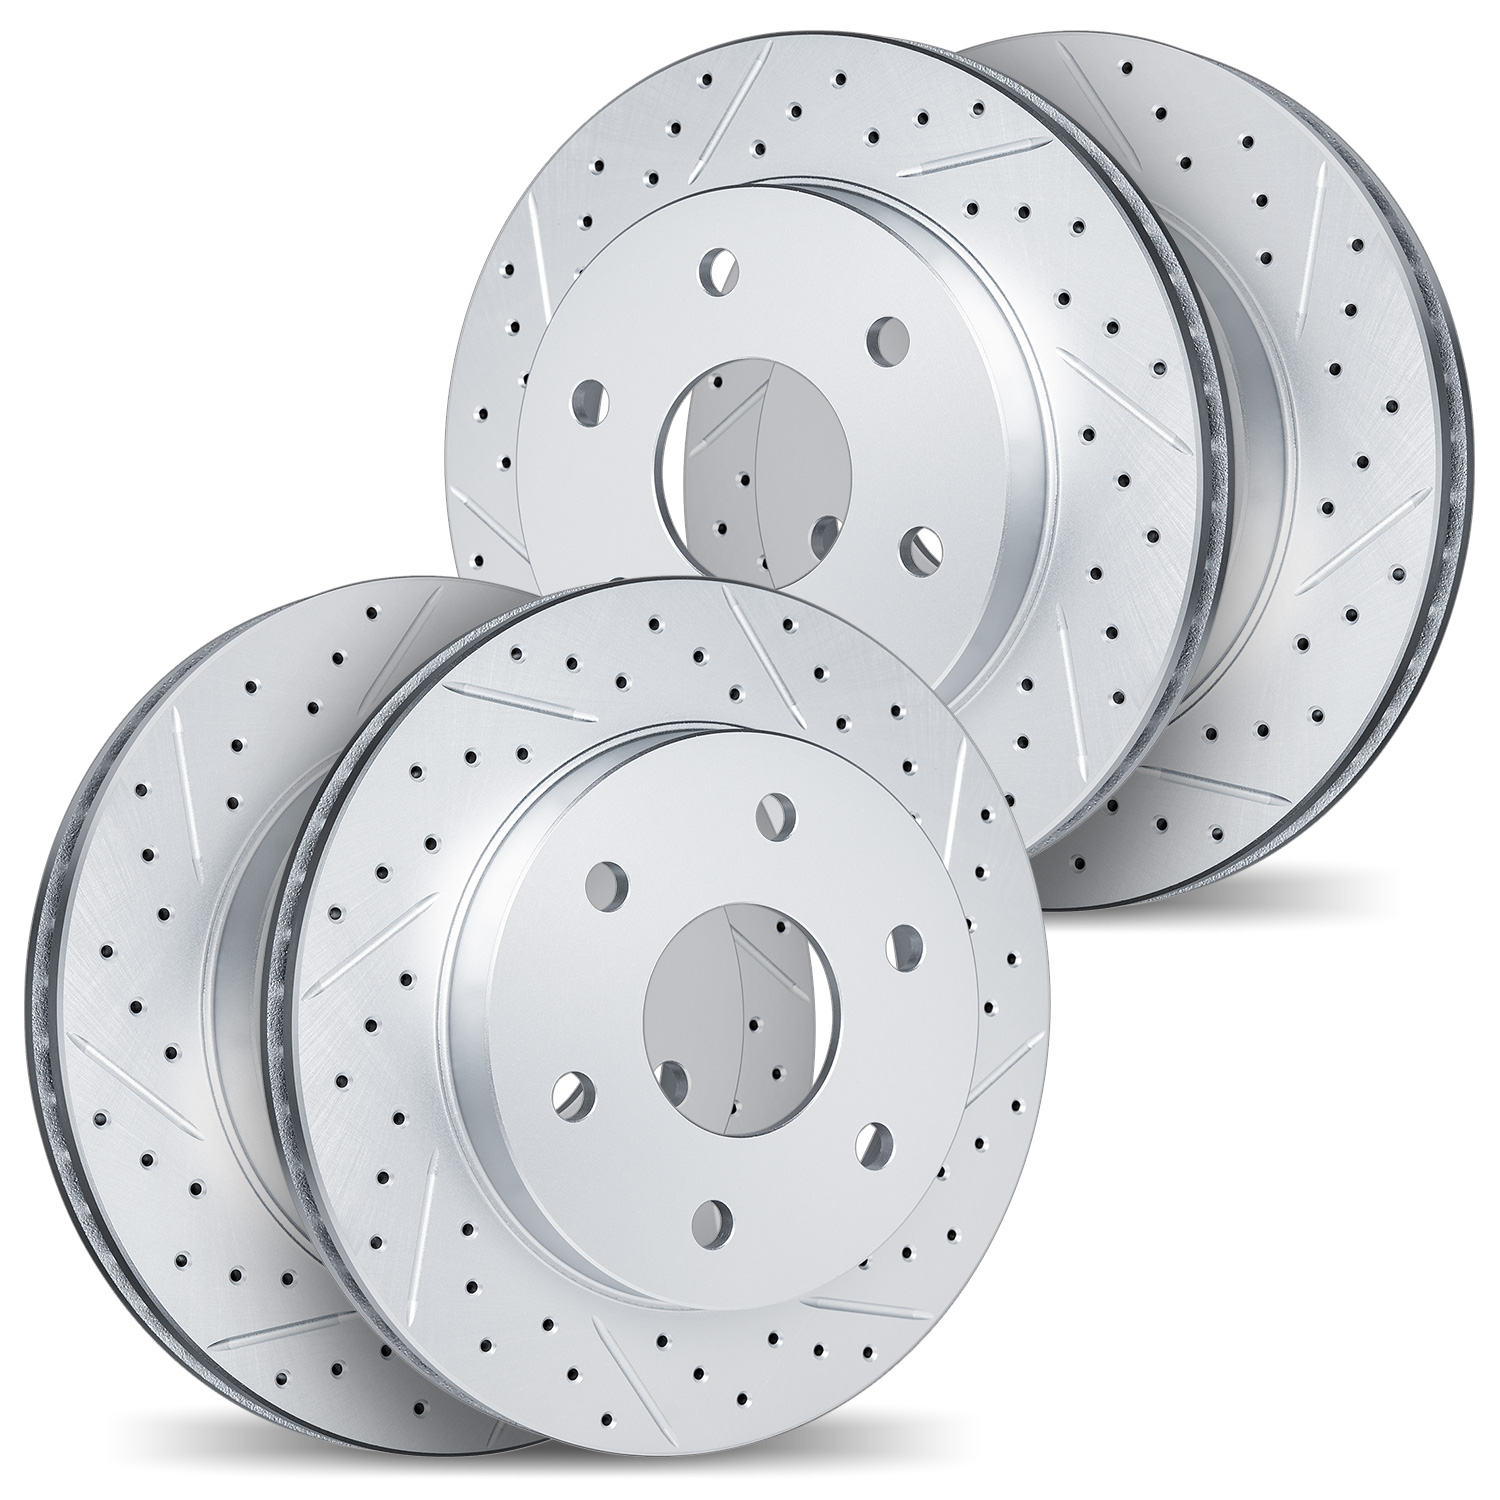 2004-46001 Geoperformance Drilled/Slotted Brake Rotors, Fits Select GM, Position: Front and Rear